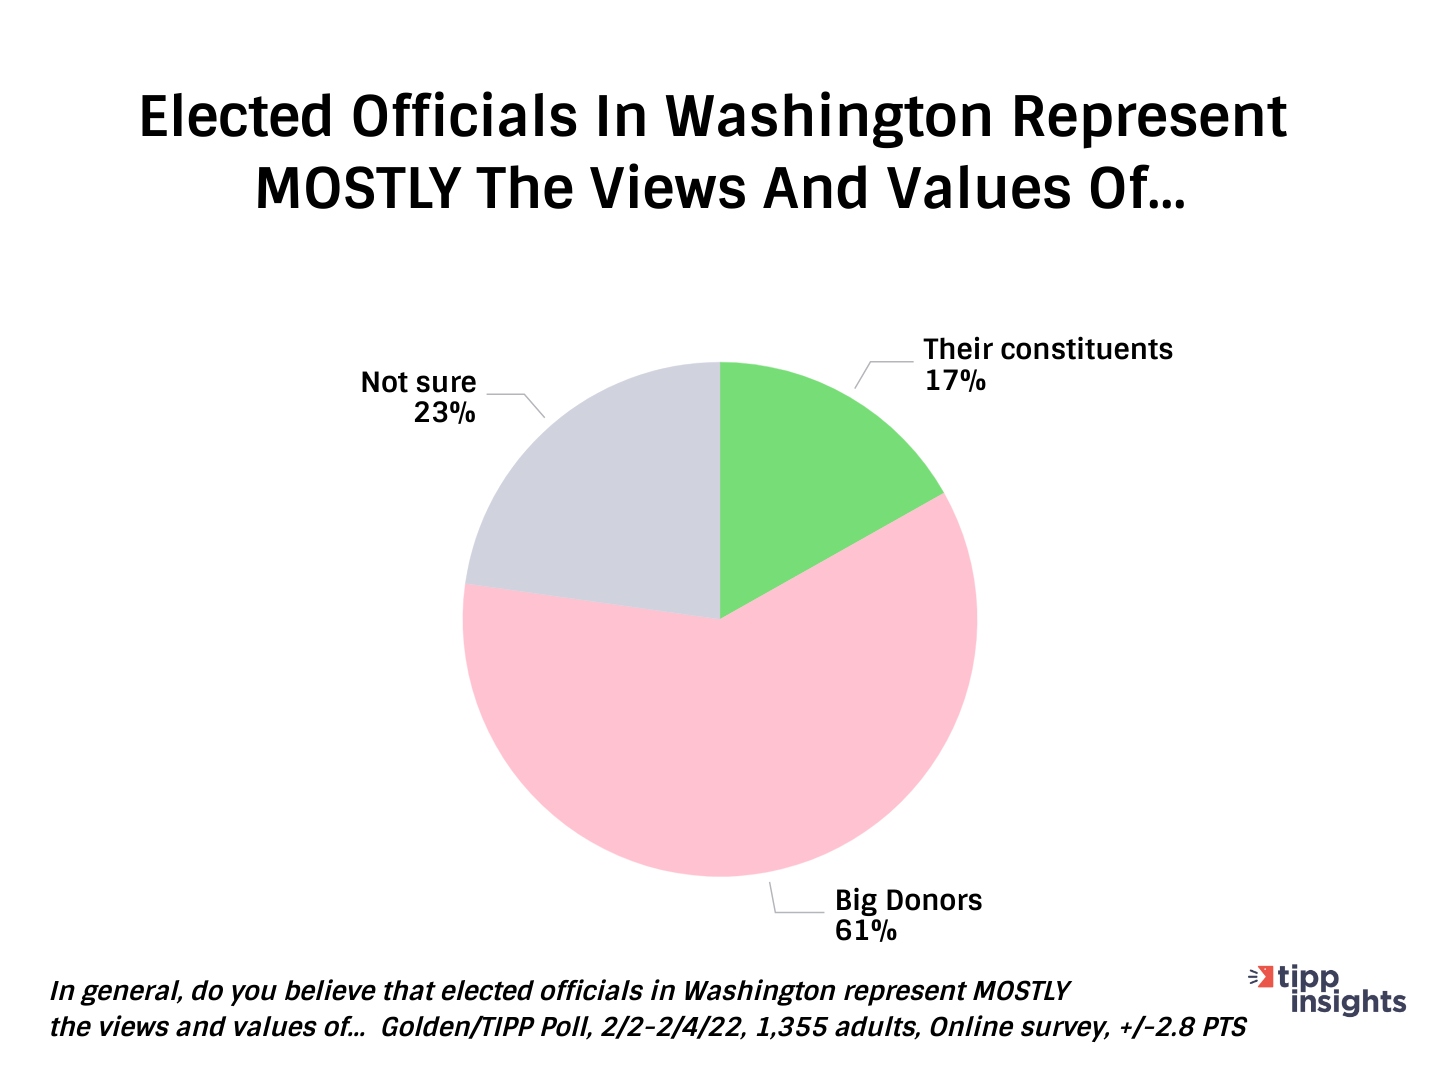 Elected officials in Washington represent mostly the views and values of...